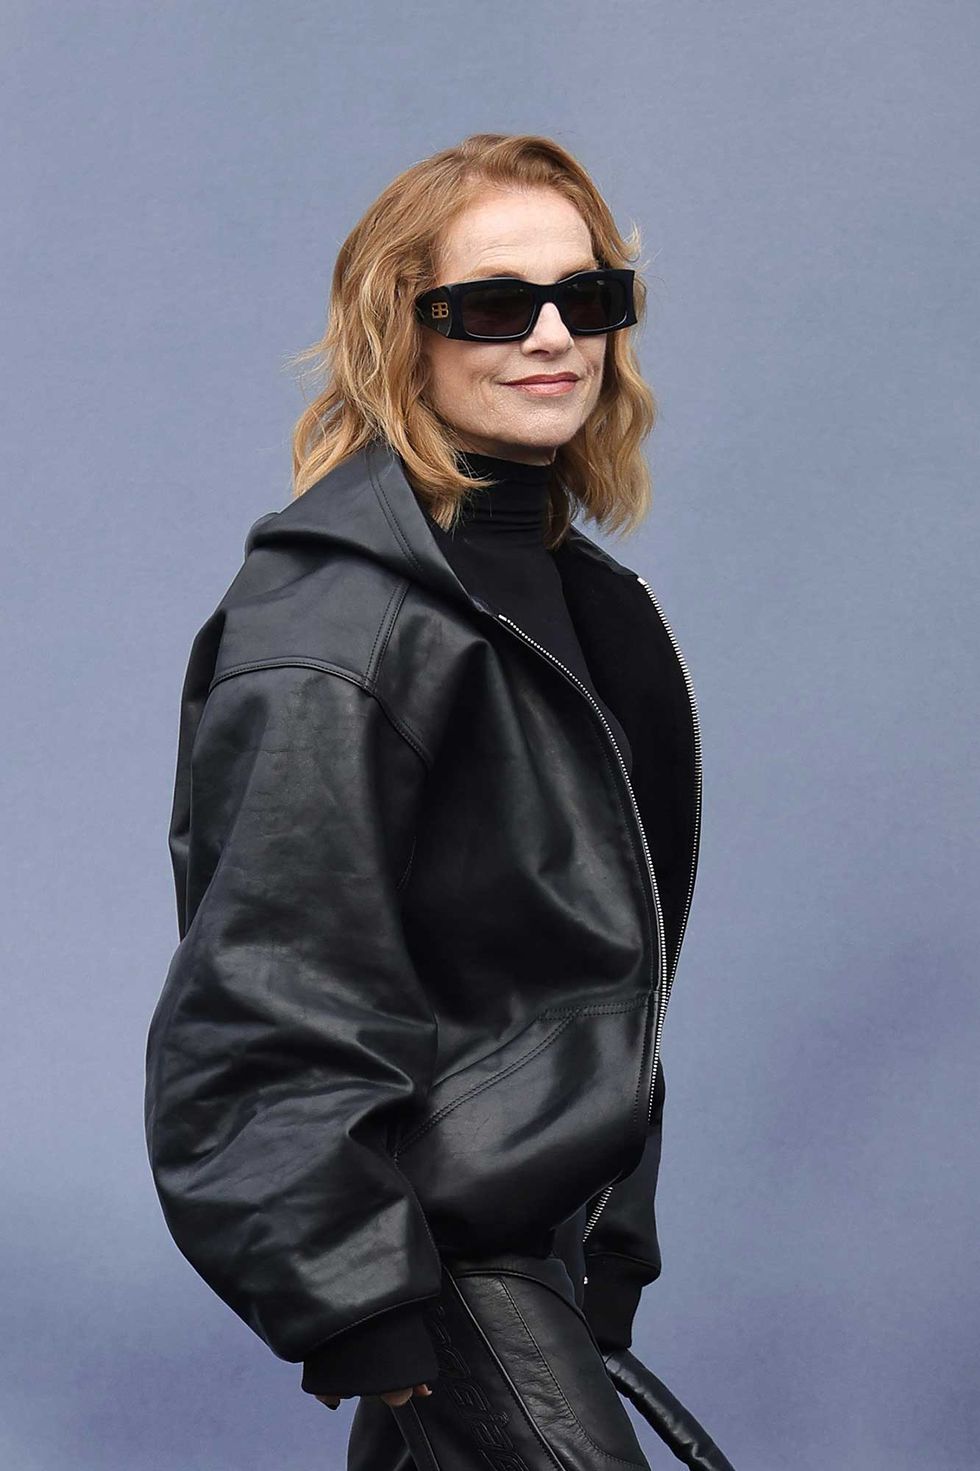 a person wearing sunglasses and a leather jacket